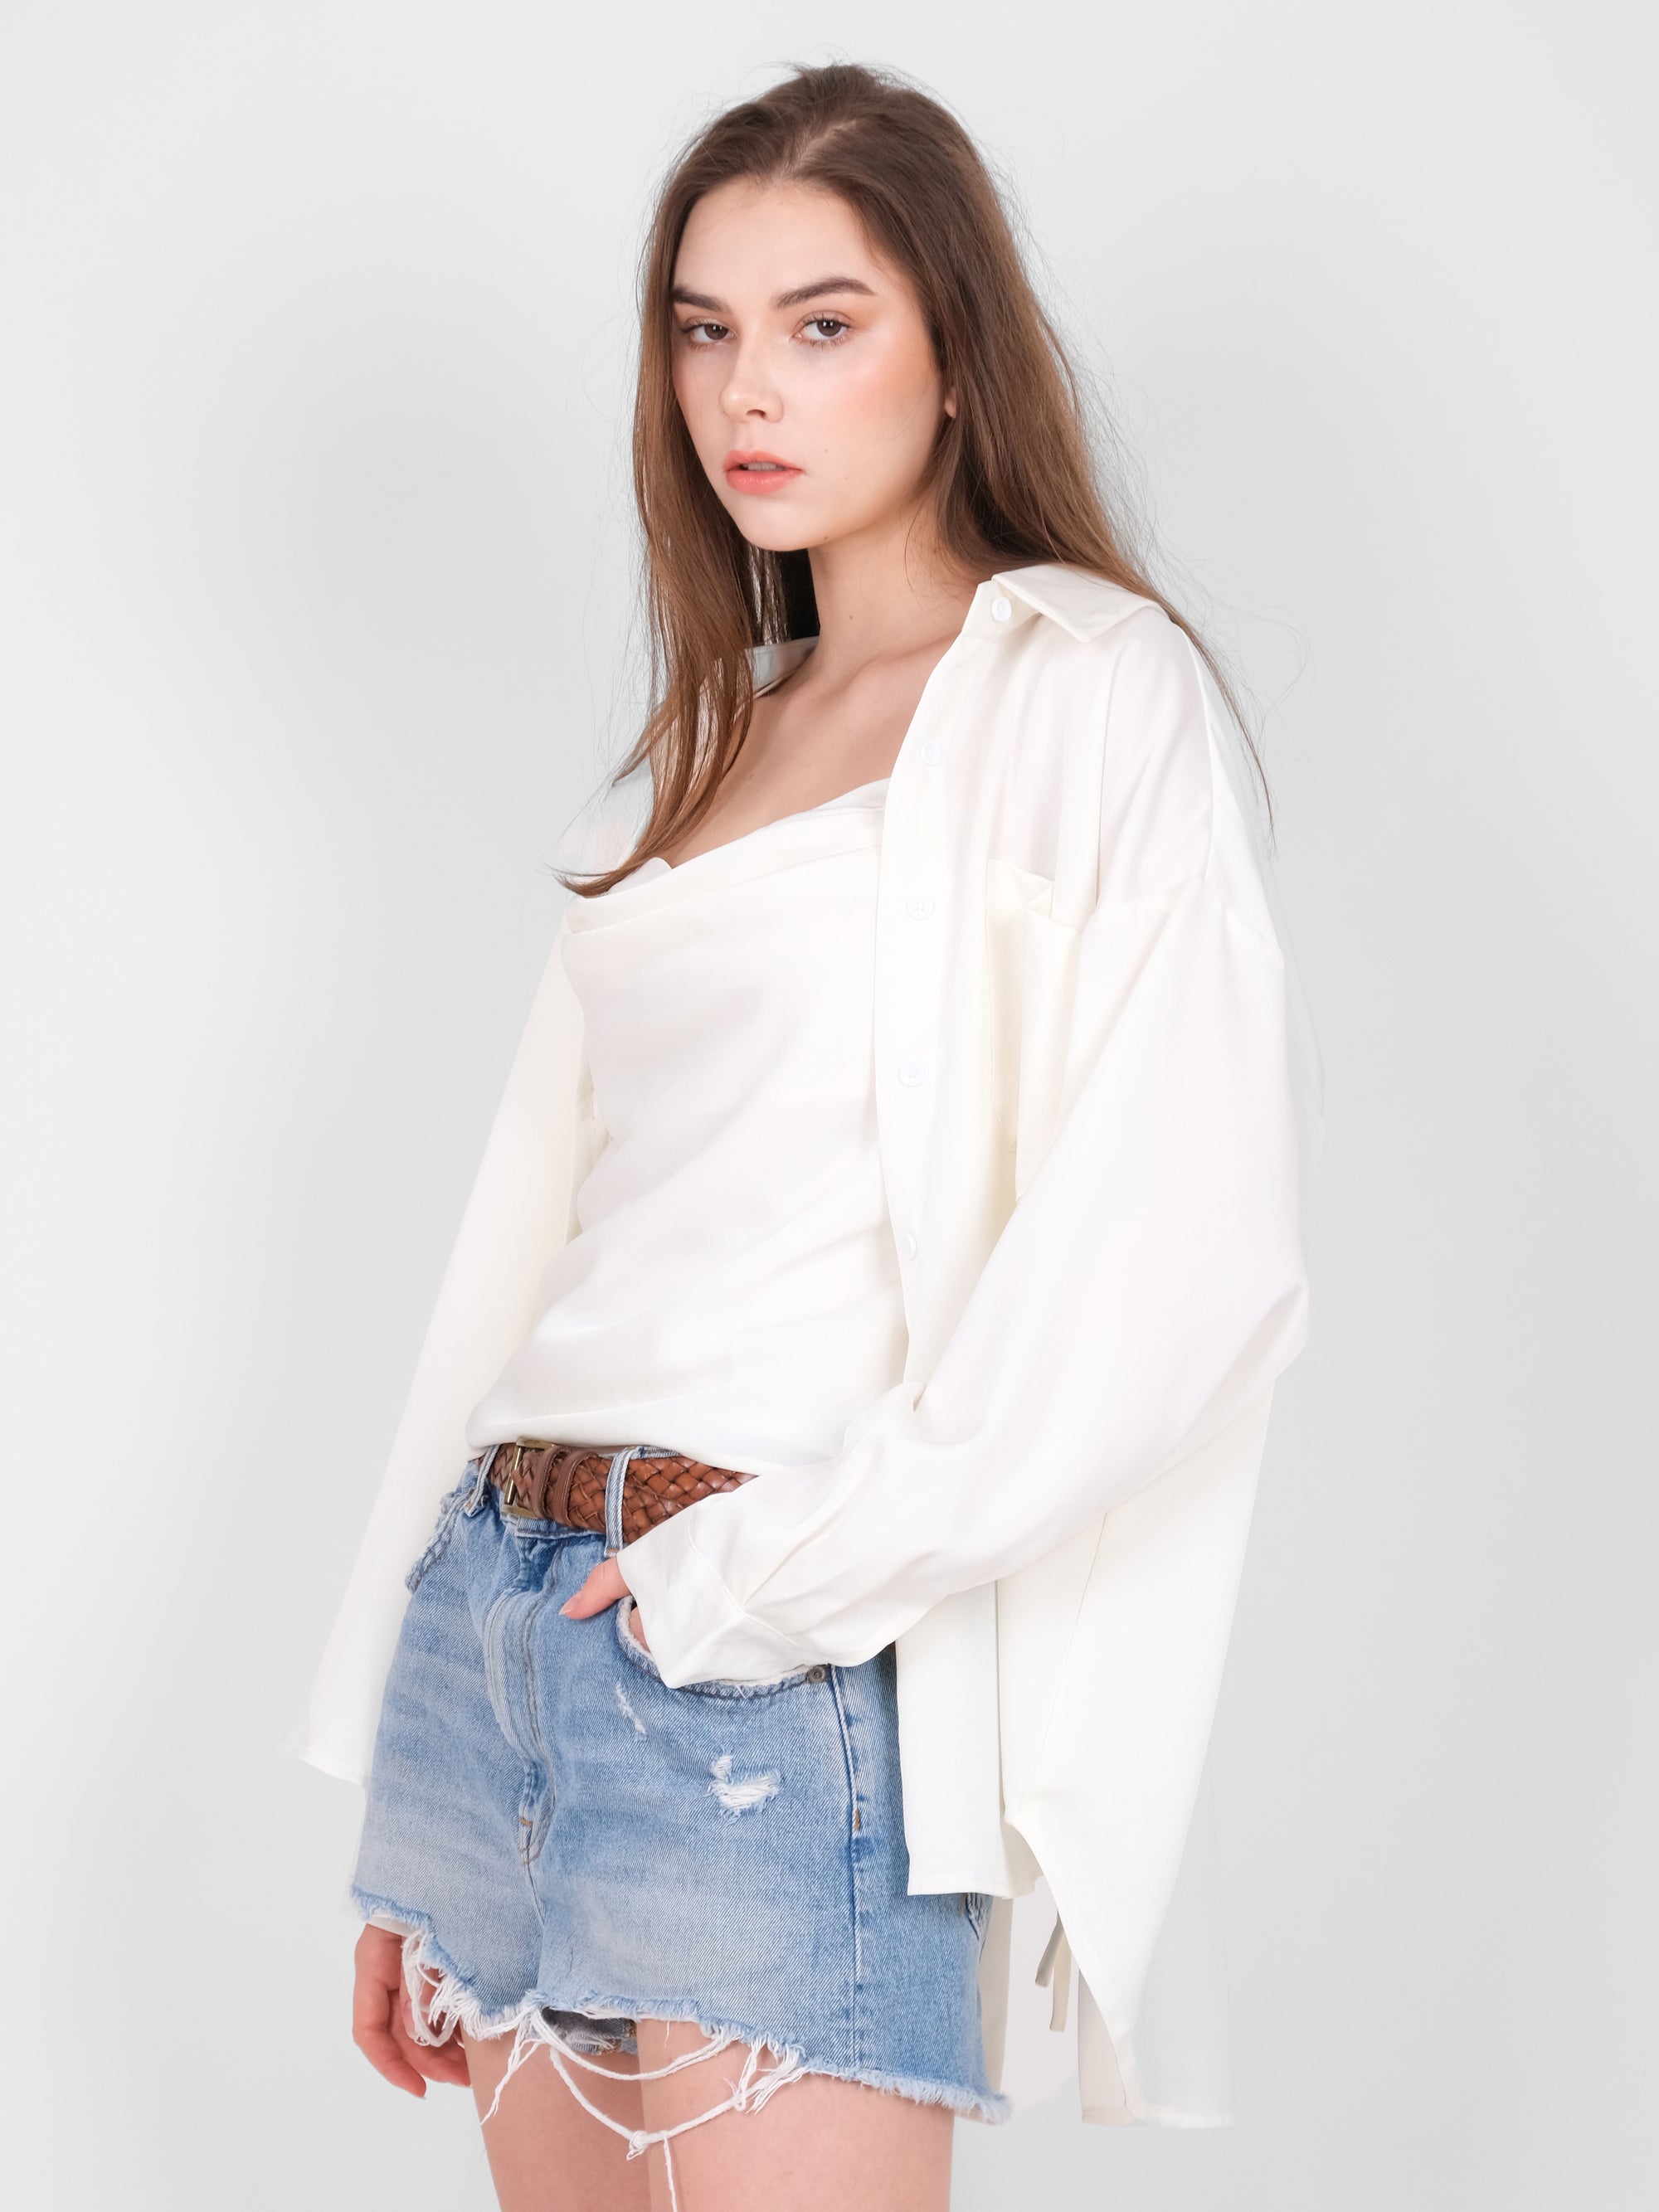 RELAXED BACK TIE SATIN SHIRT